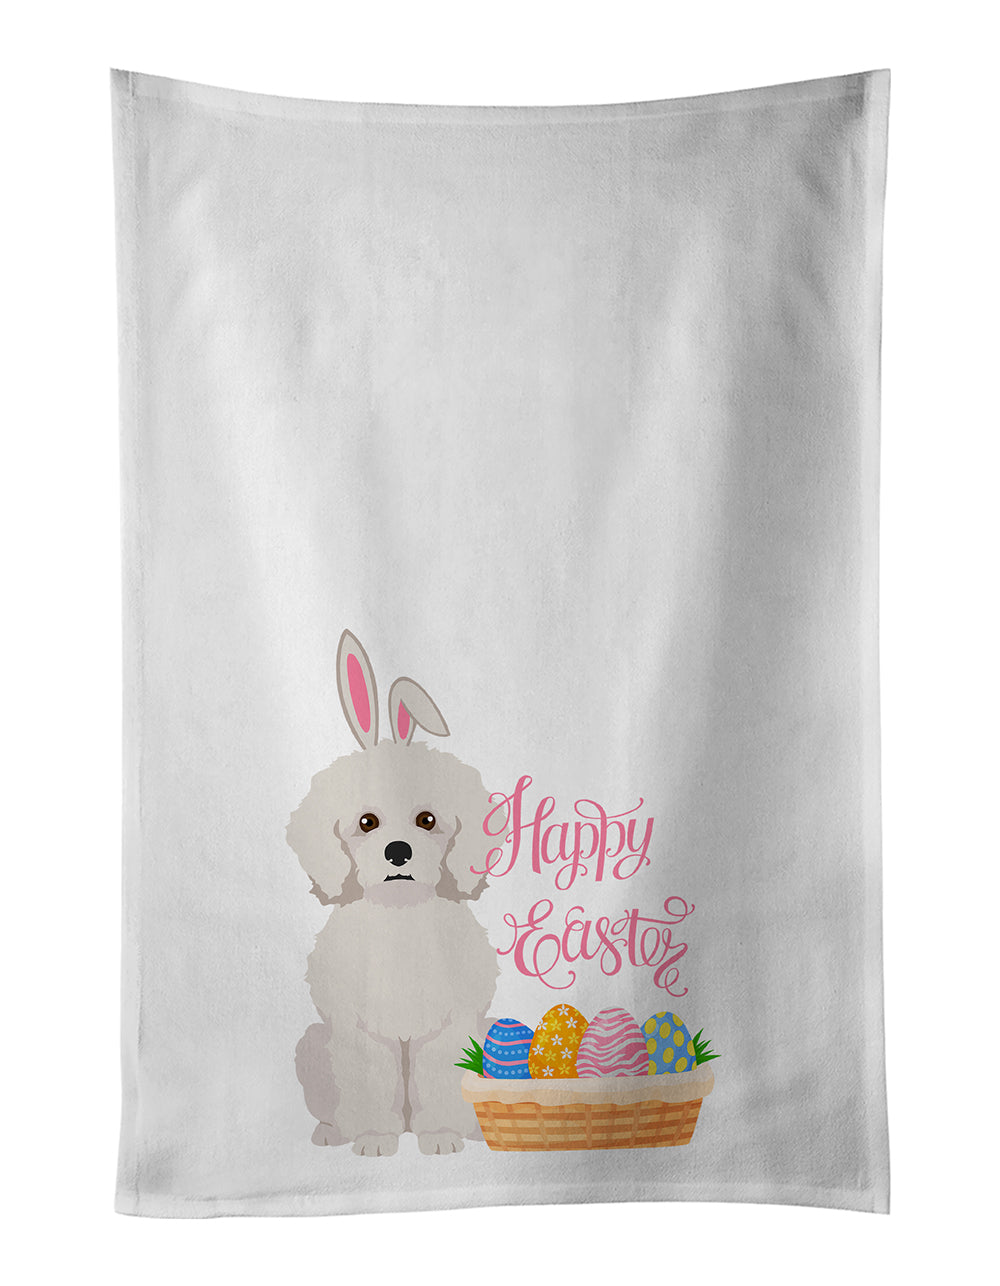 Buy this Bichon Frise Easter White Kitchen Towel Set of 2 Dish Towels